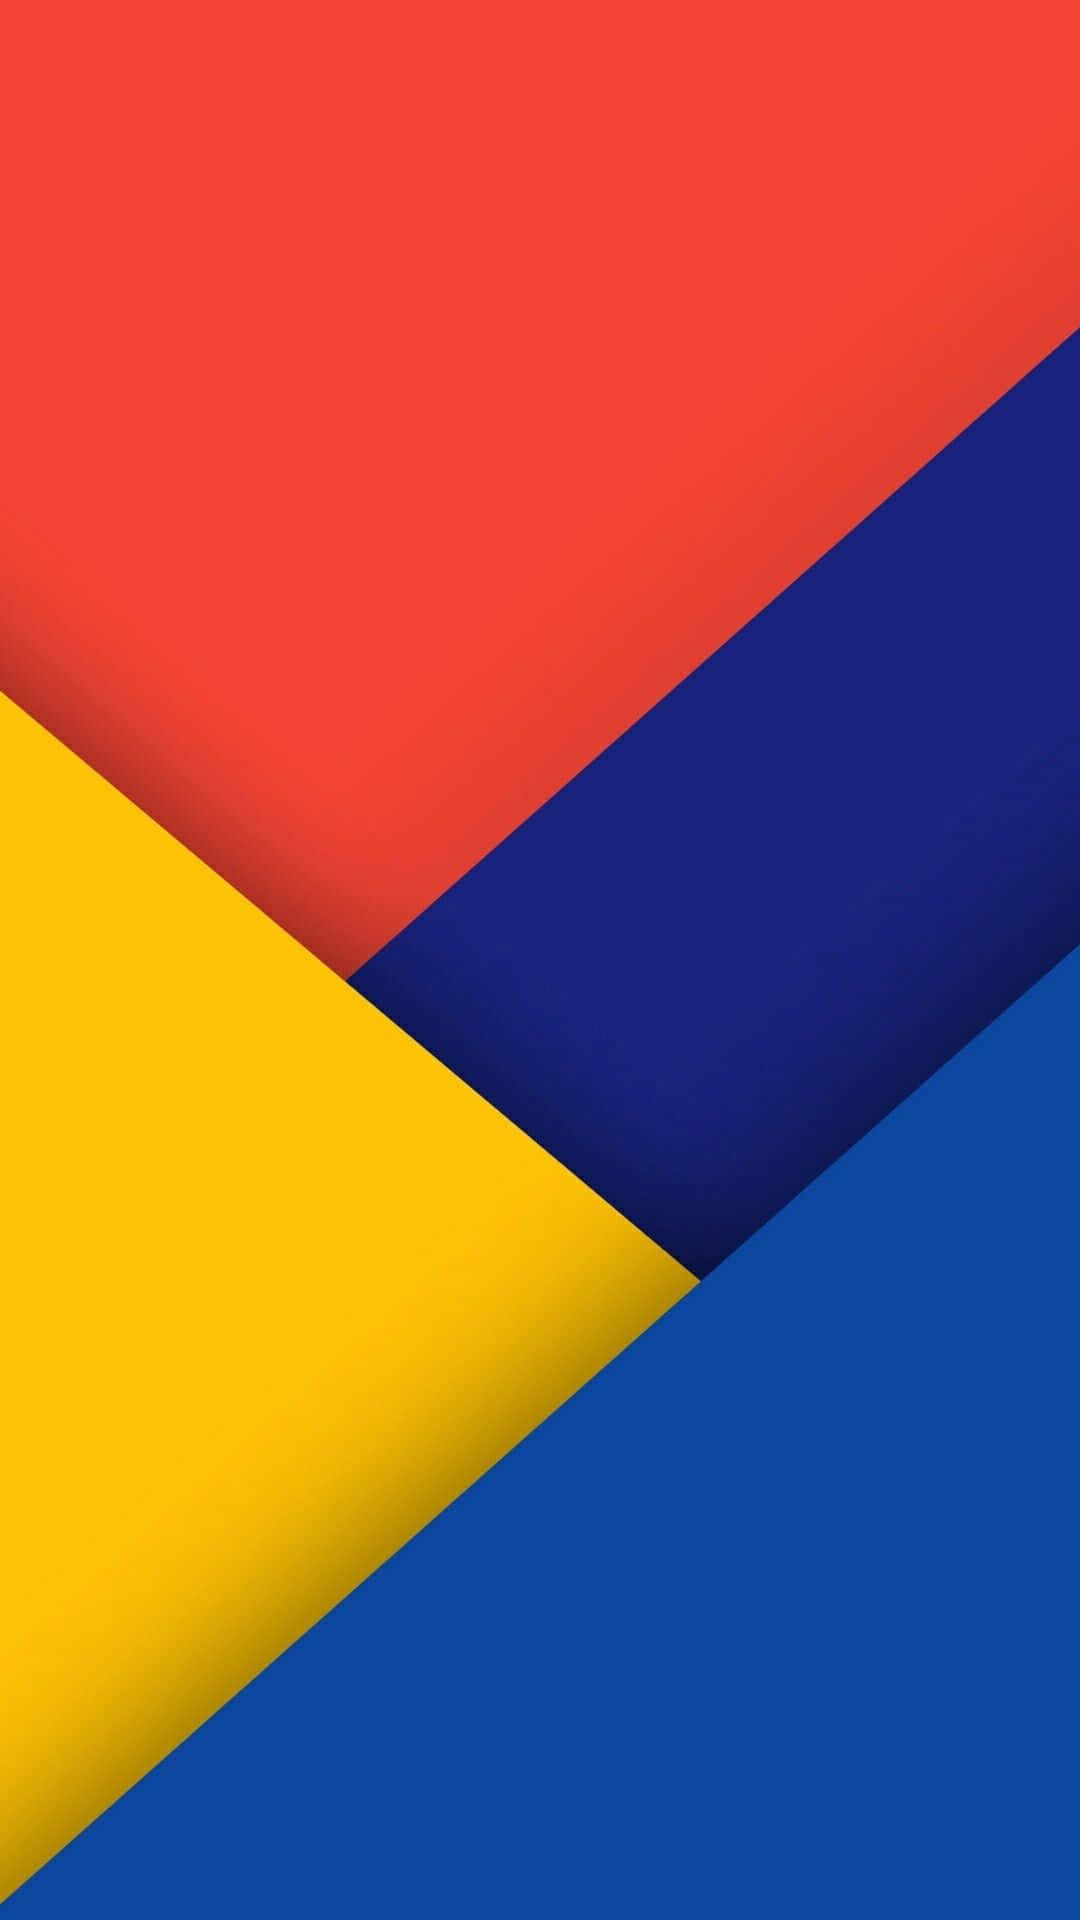 A Blue and Yellow Gradient Background